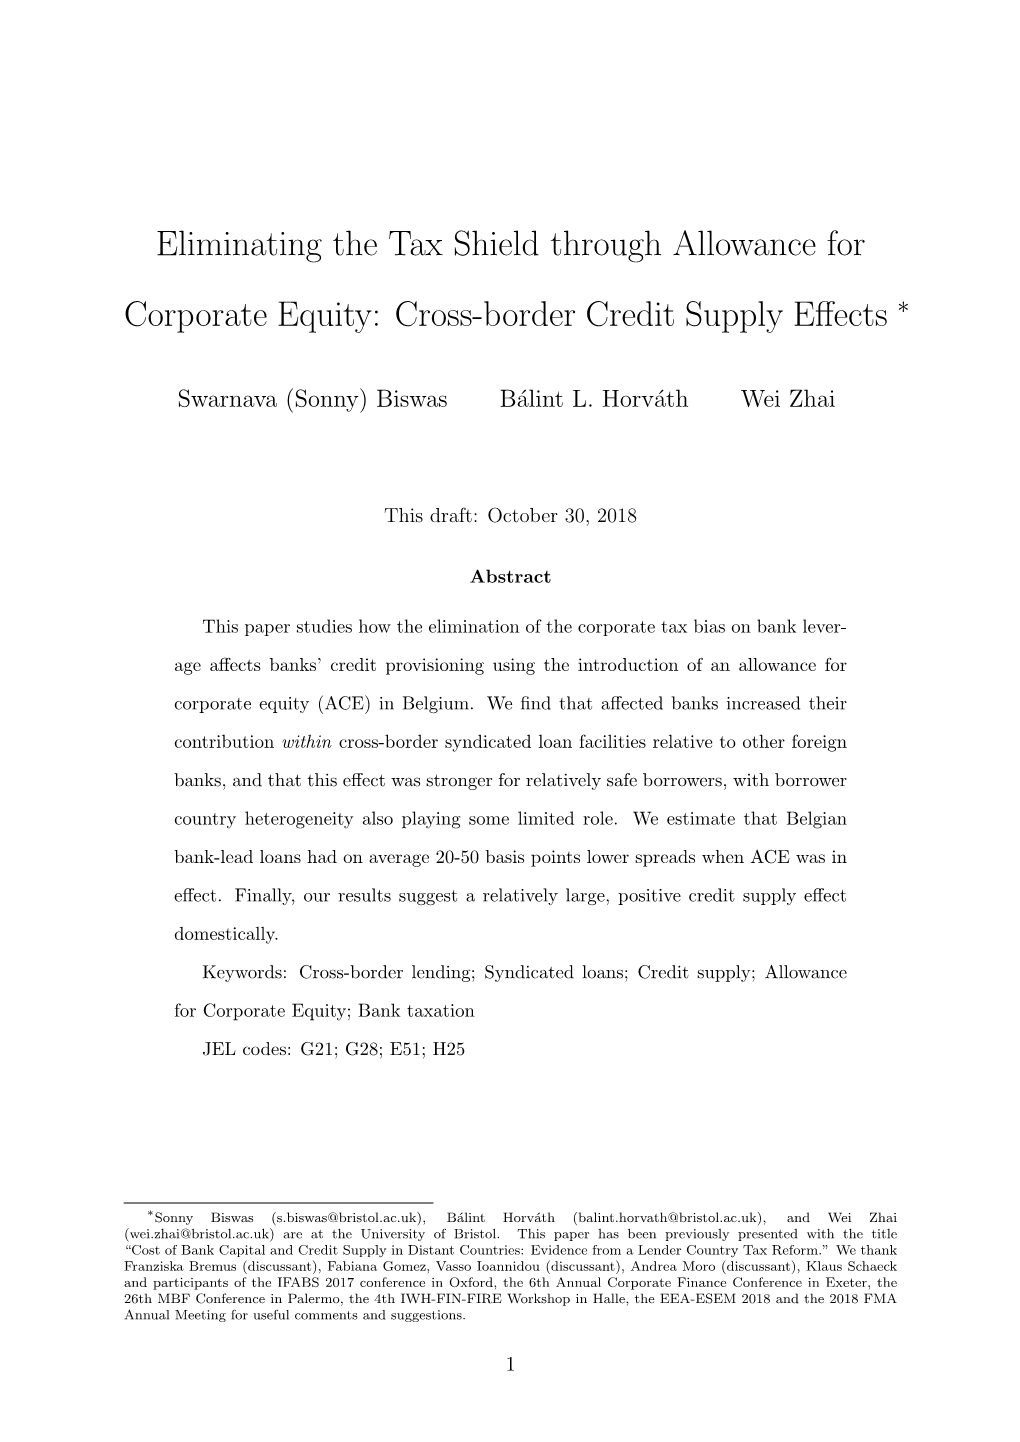 Eliminating the Tax Shield Through Allowance for Corporate Equity: Cross-Border Credit Supply Eﬀects ∗